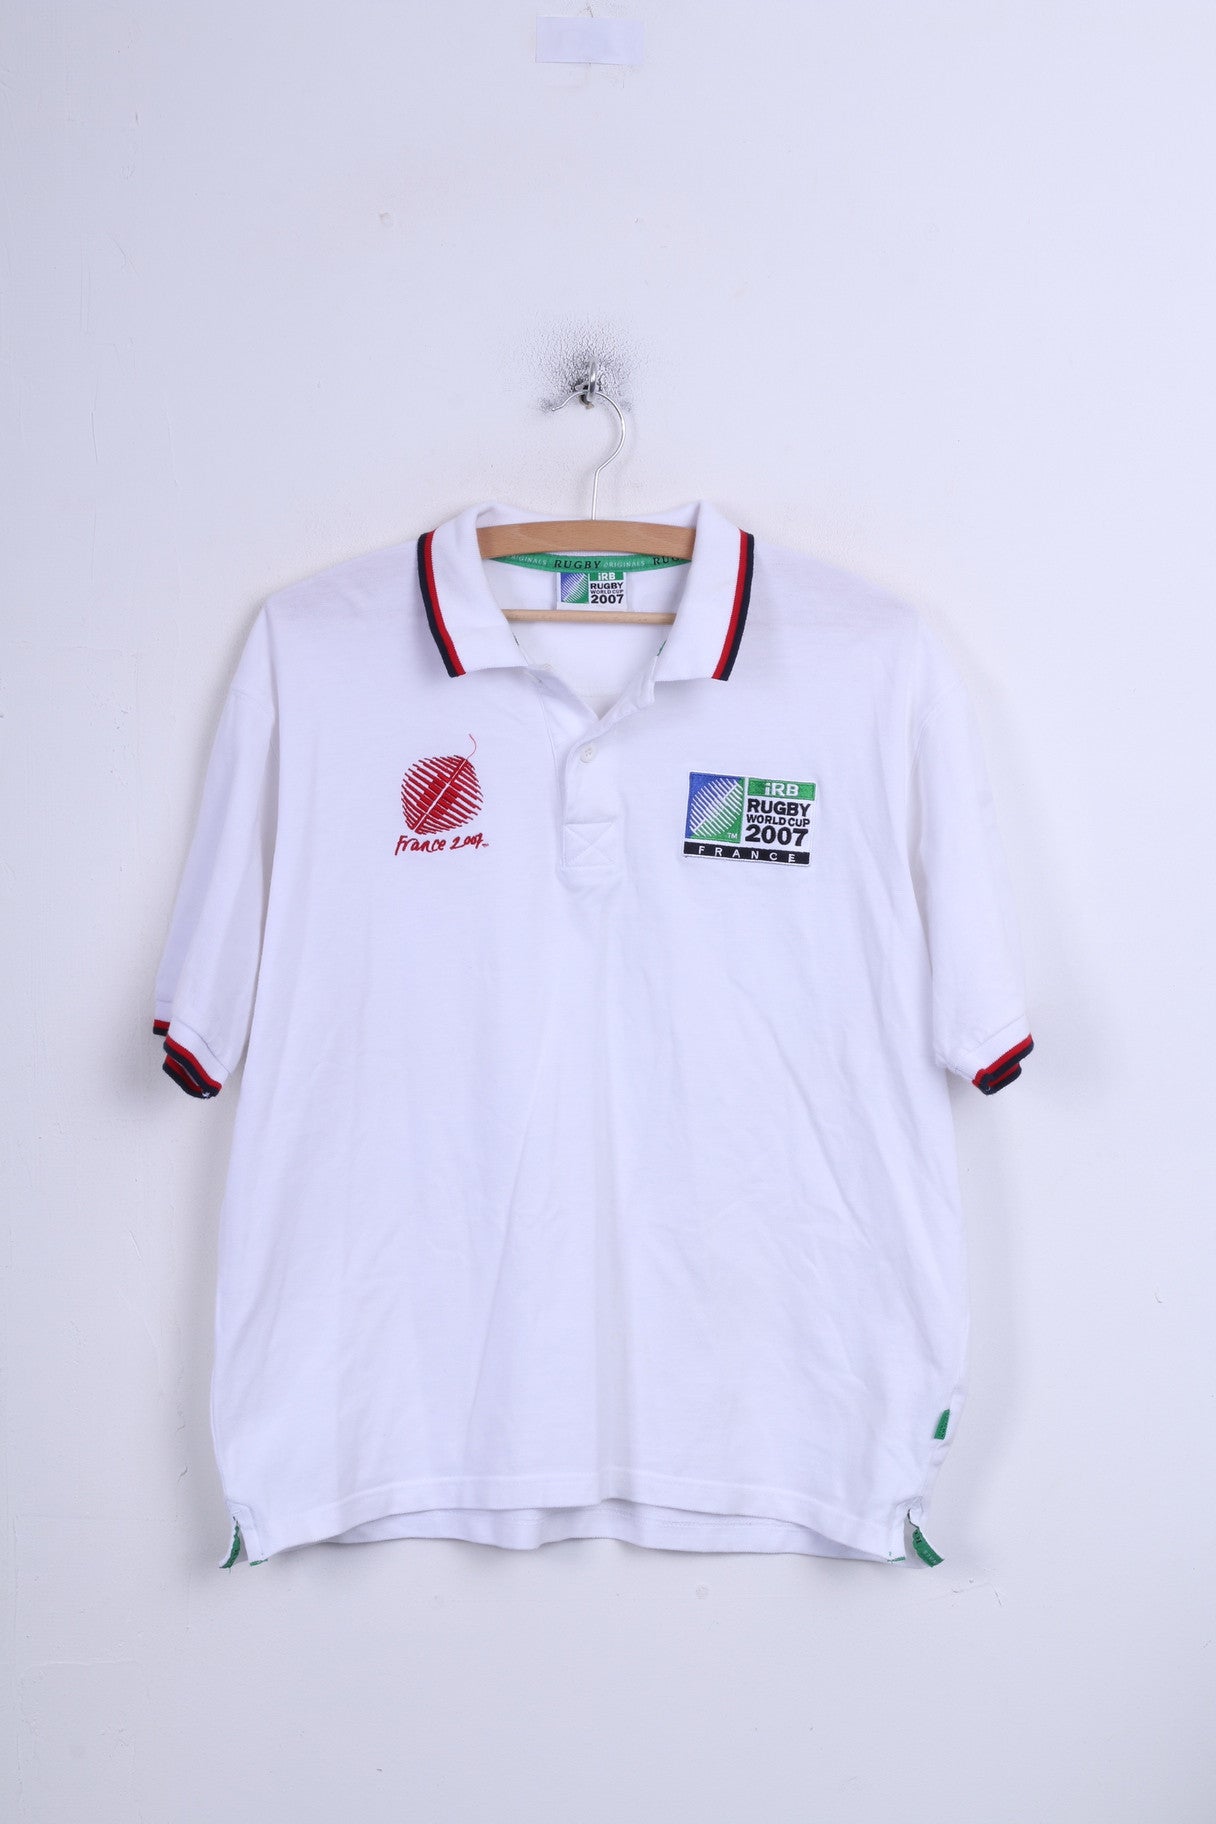 Irb Rugby 2007 Mens M Polo Shirt White Cotton France Sport - RetrospectClothes